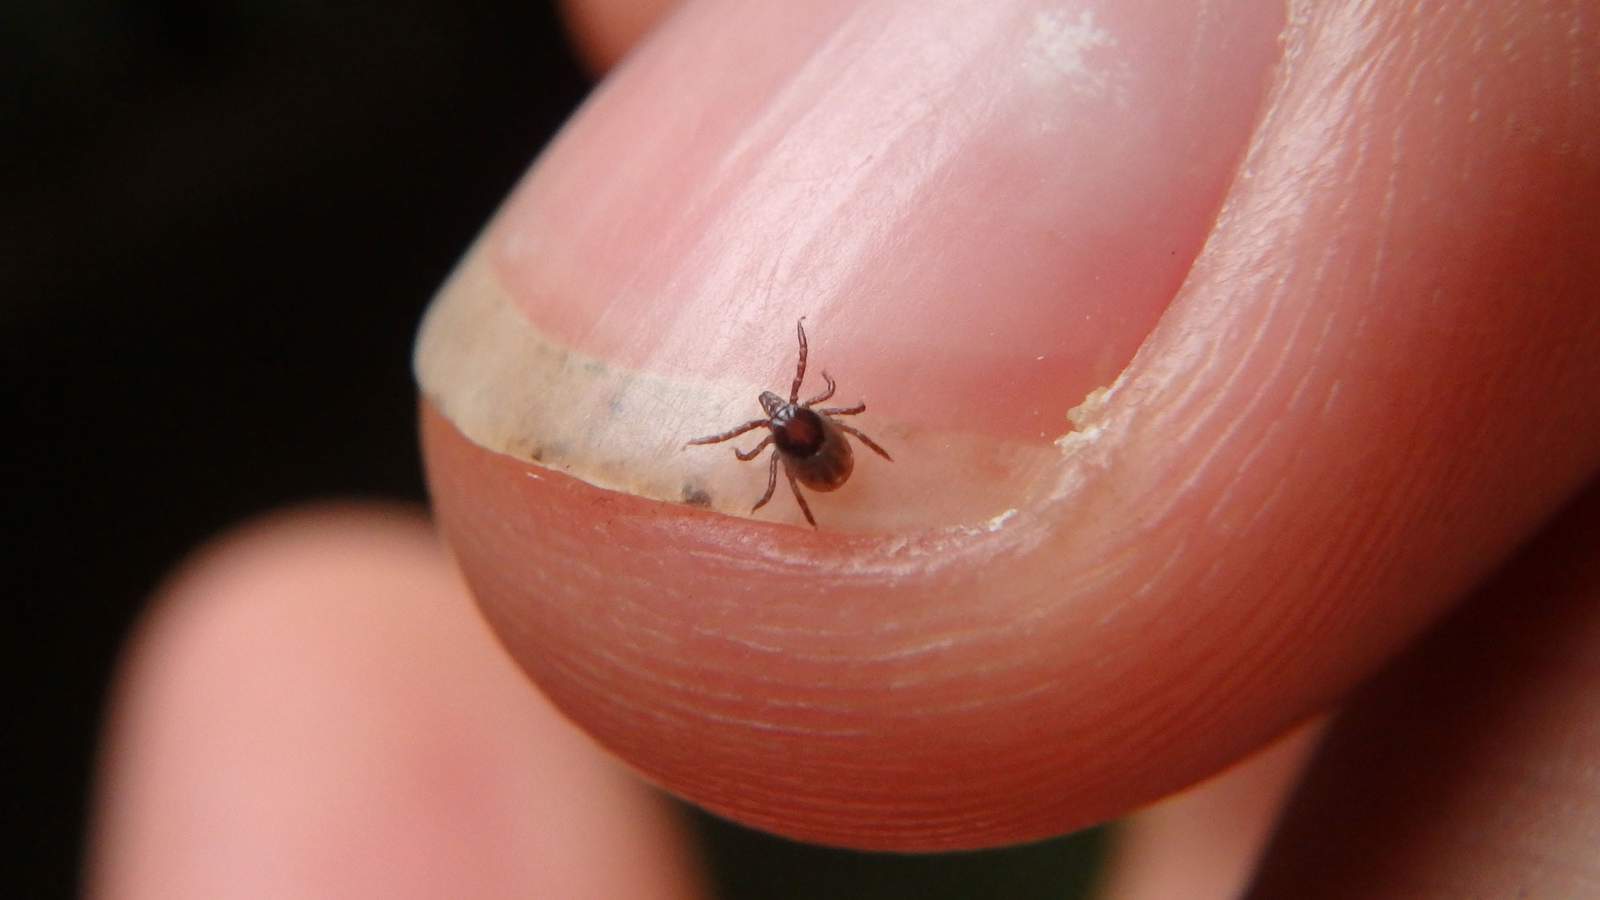 Warmer weather means it’s time to be tick aware